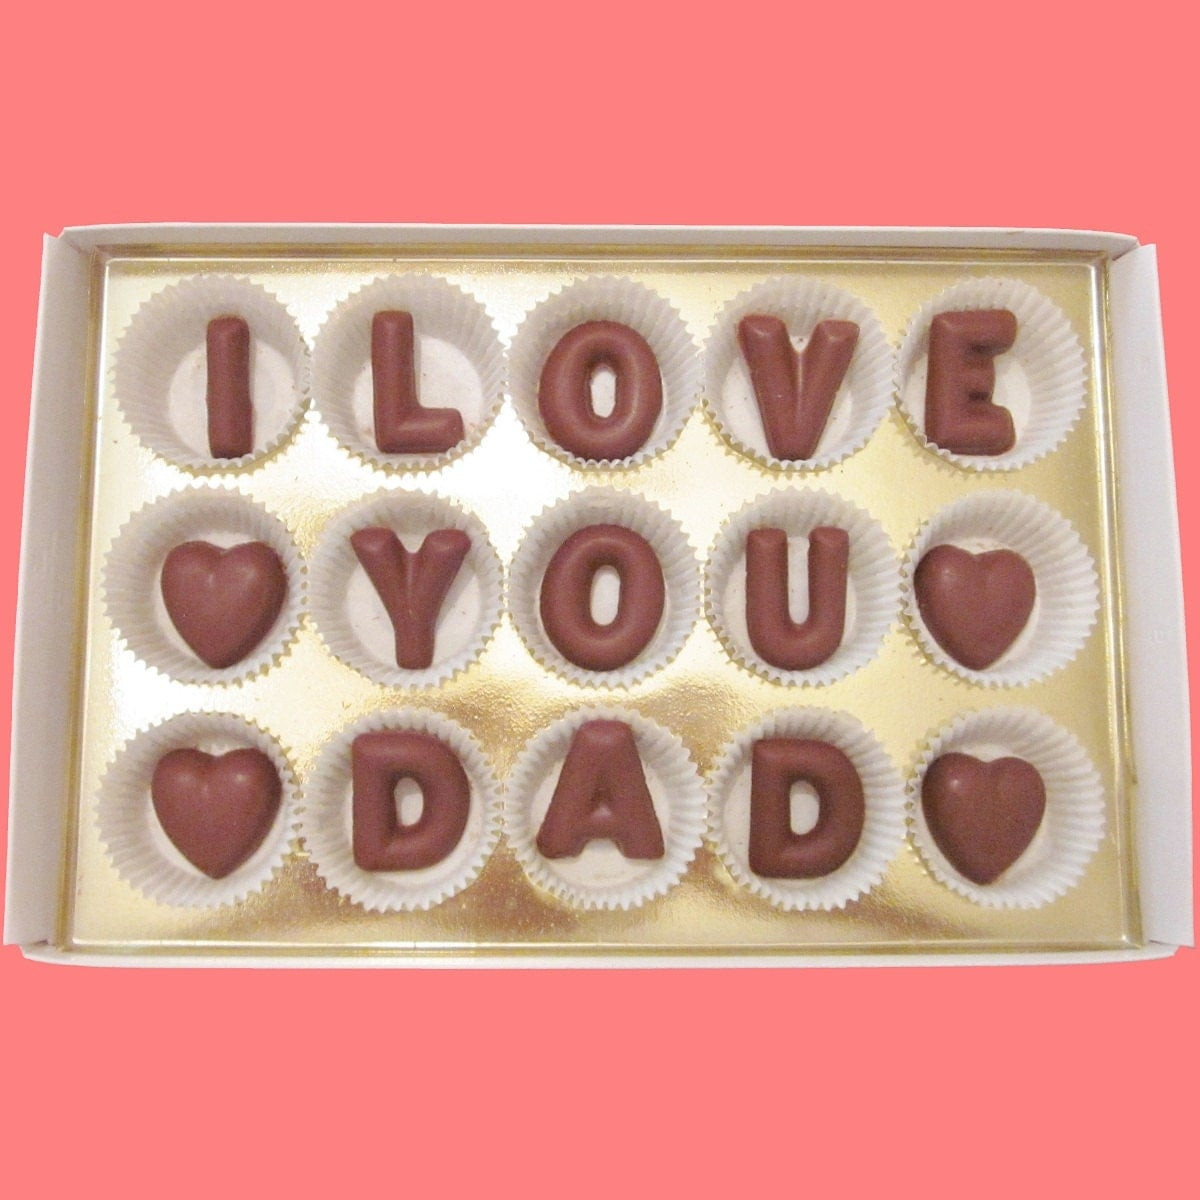 Father Daughter Valentine Gift Ideas
 Valentines Day Gift for Dad from Daughter Fun Gift Idea Gift